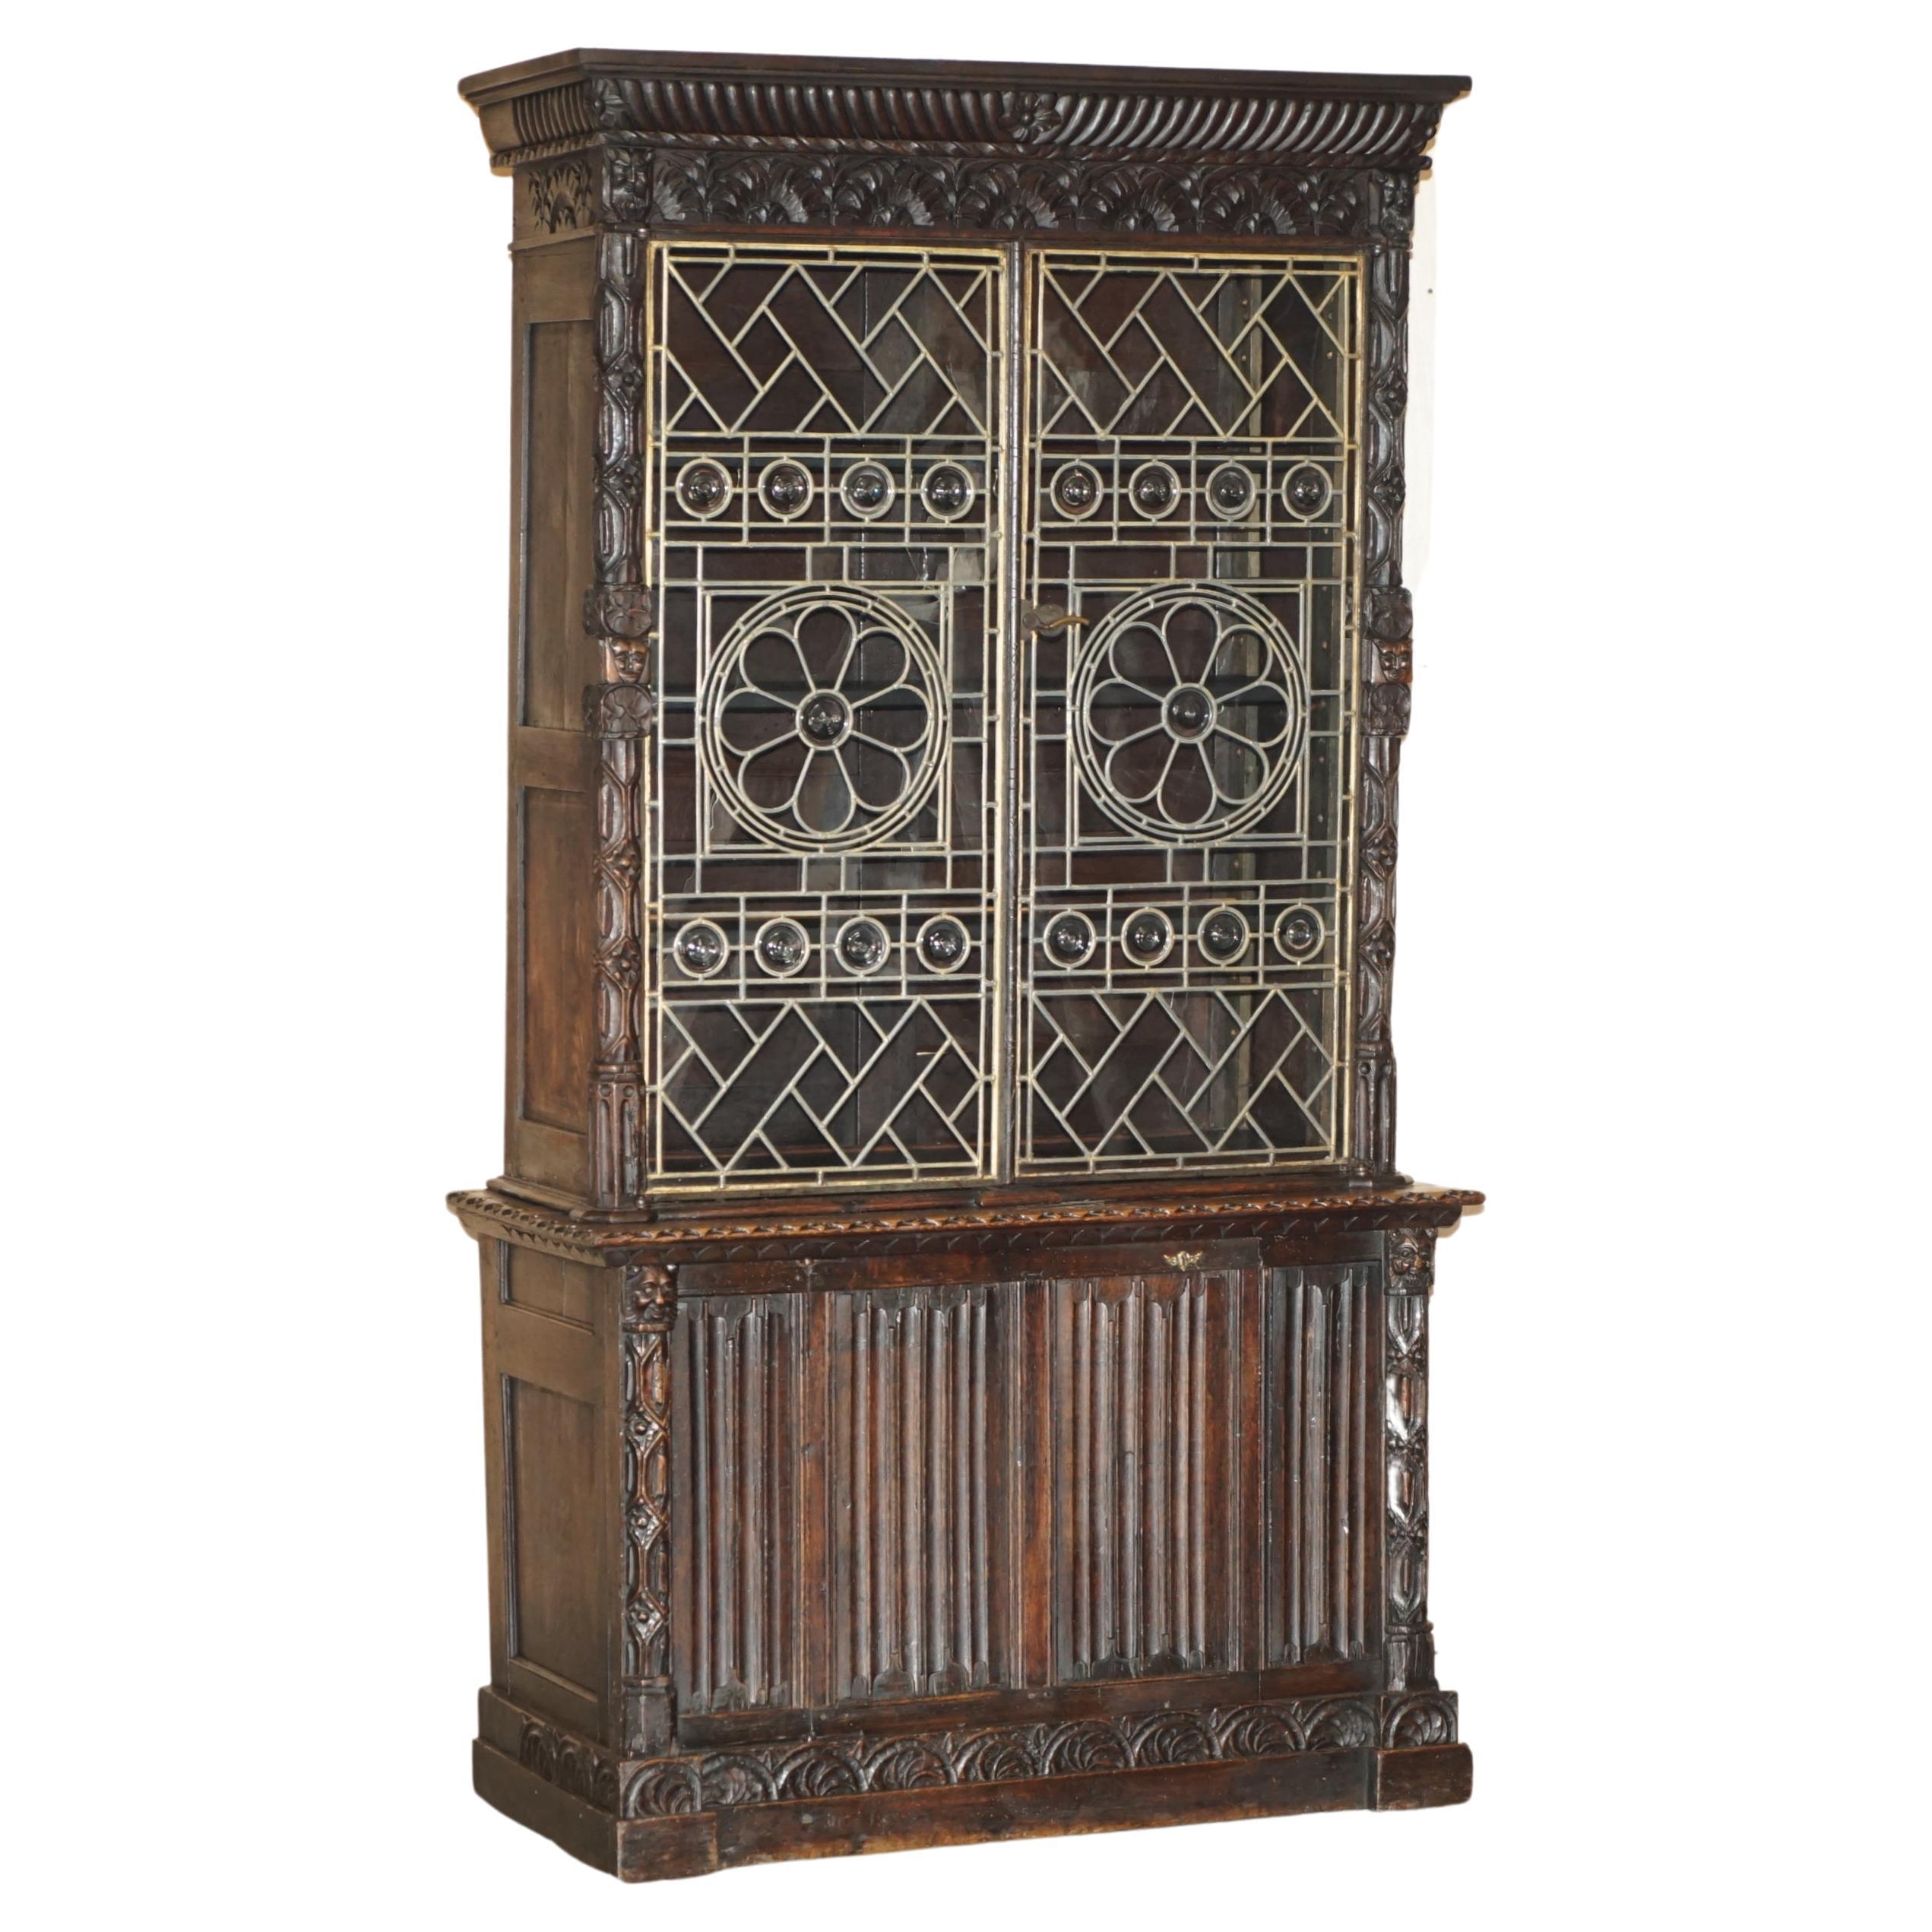 ANTiQUE JACOBEAN LINEN FOLD CARVED ZINC LINED ASTRAL GLAZED LIBRARY BOOKCASe For Sale